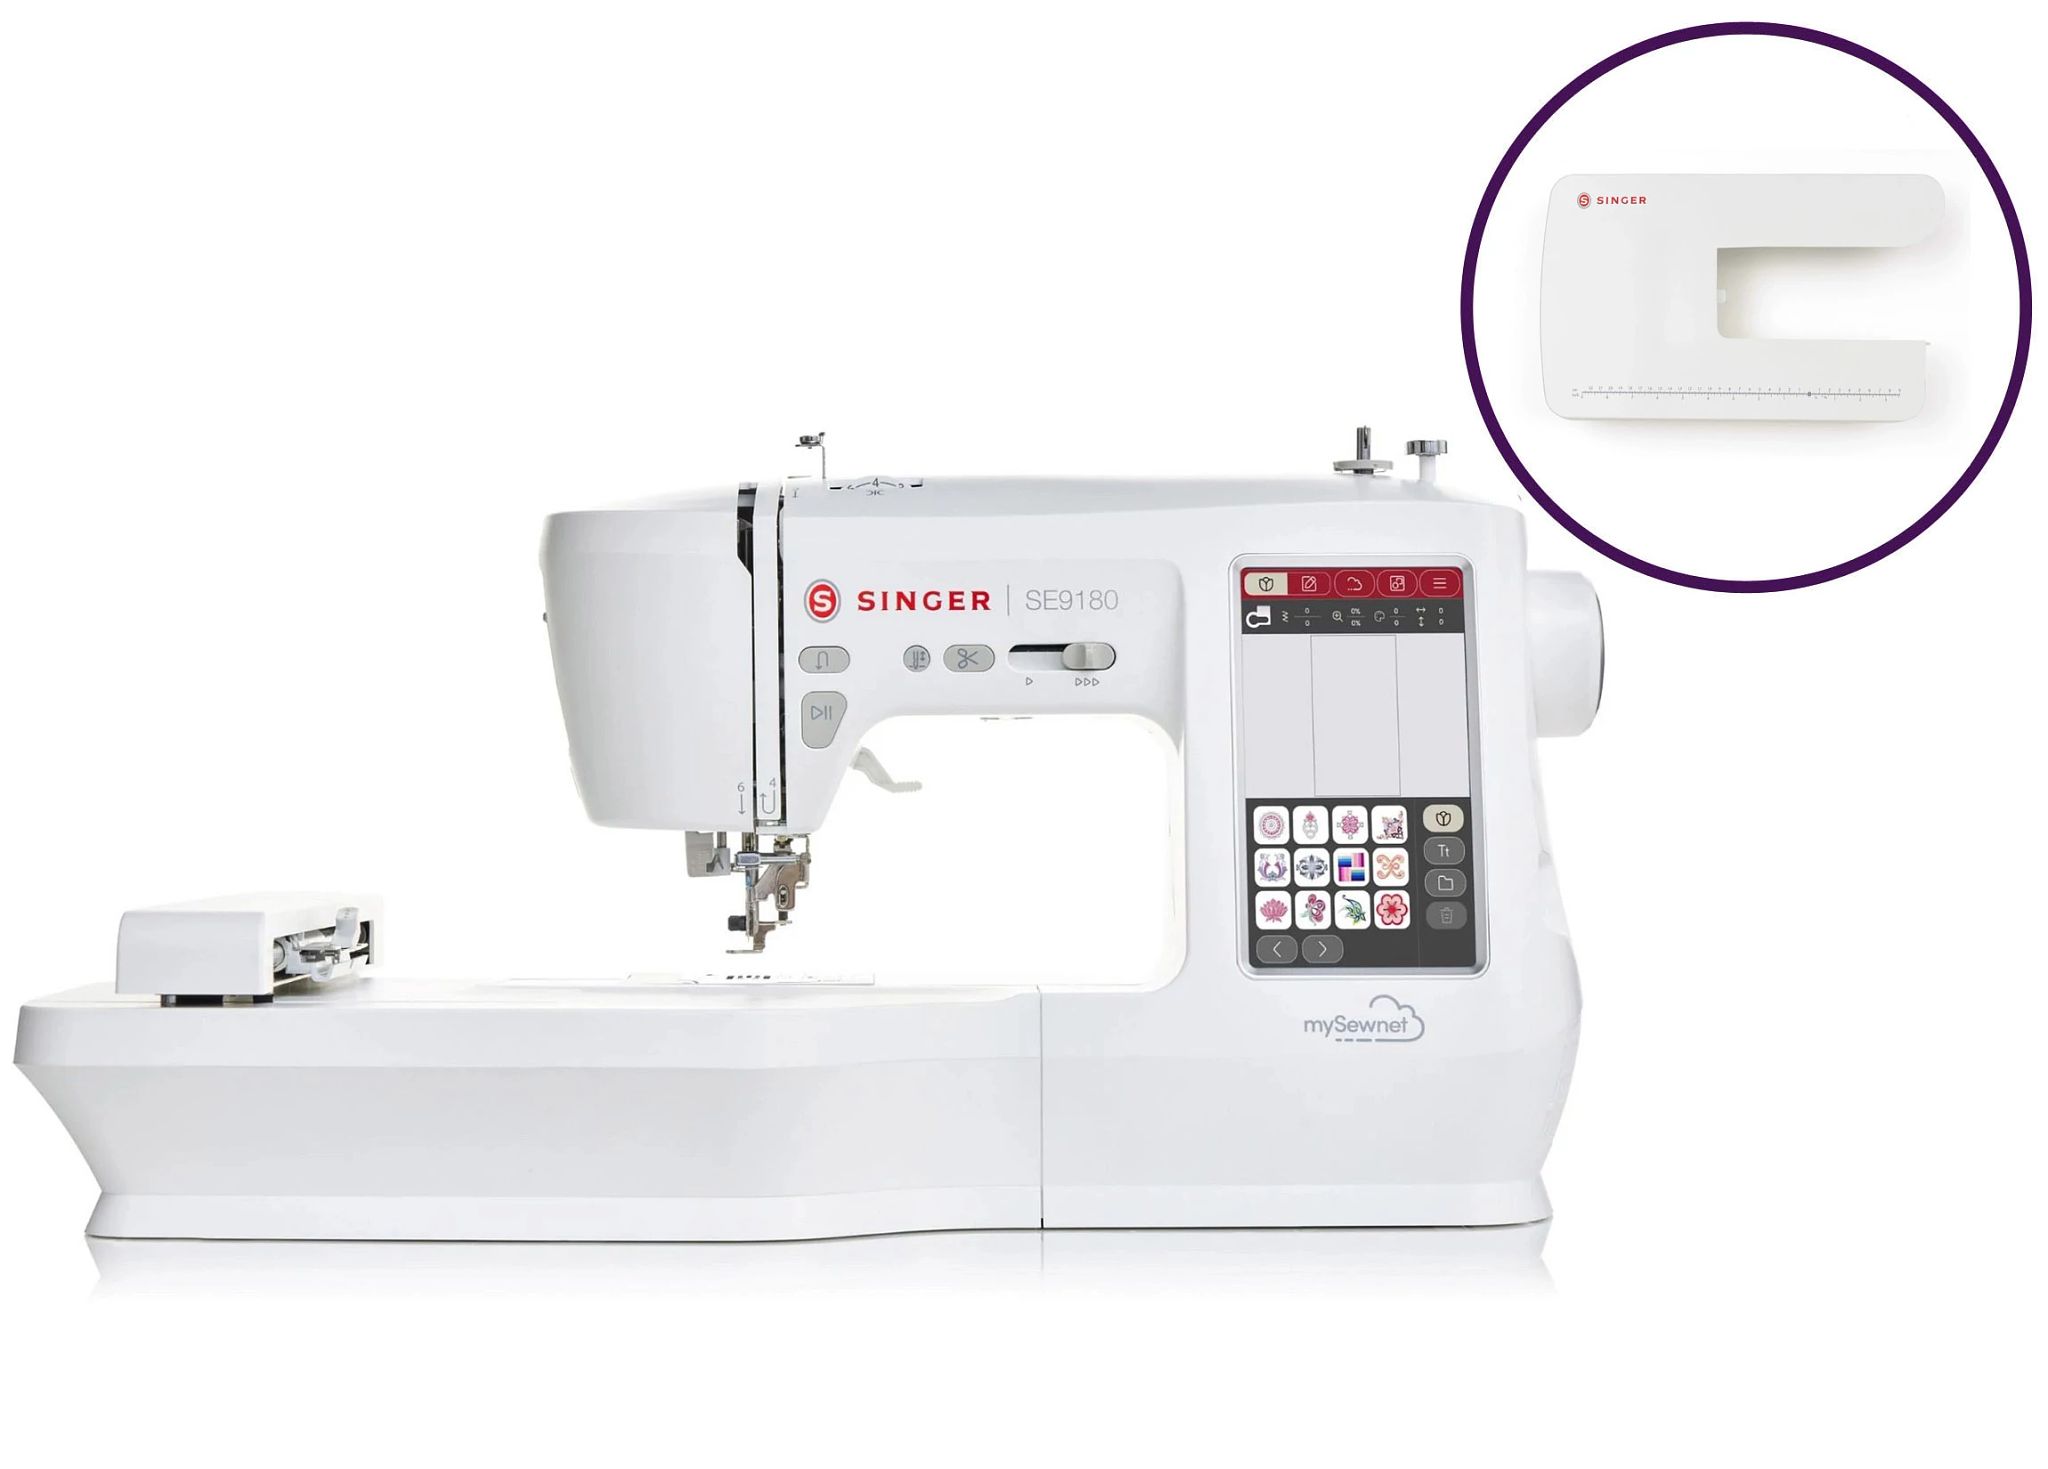 Embroidery Machines vs Sewing Machines: Similarities and Differences  Sewbroidery